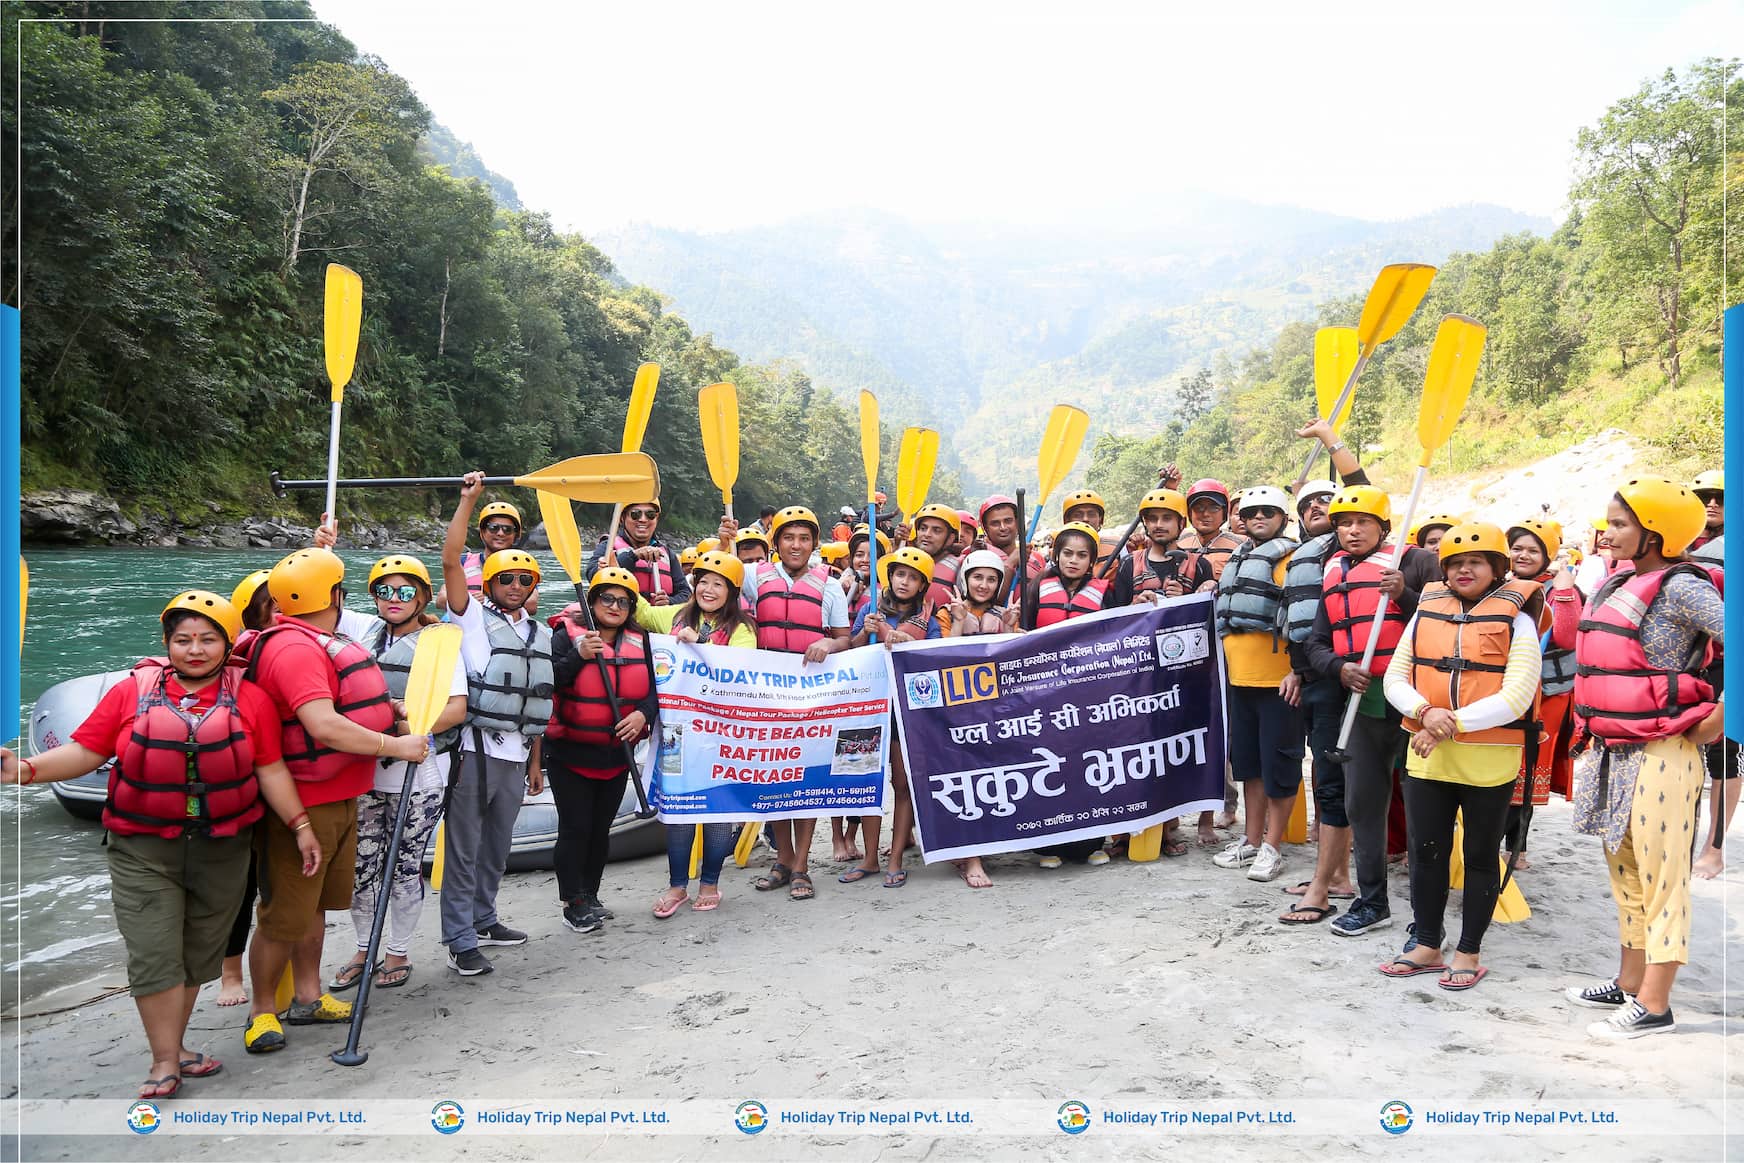 Discover the Adventure of White River Rafting at Bhote Koshi with Holiday Trip Nepal